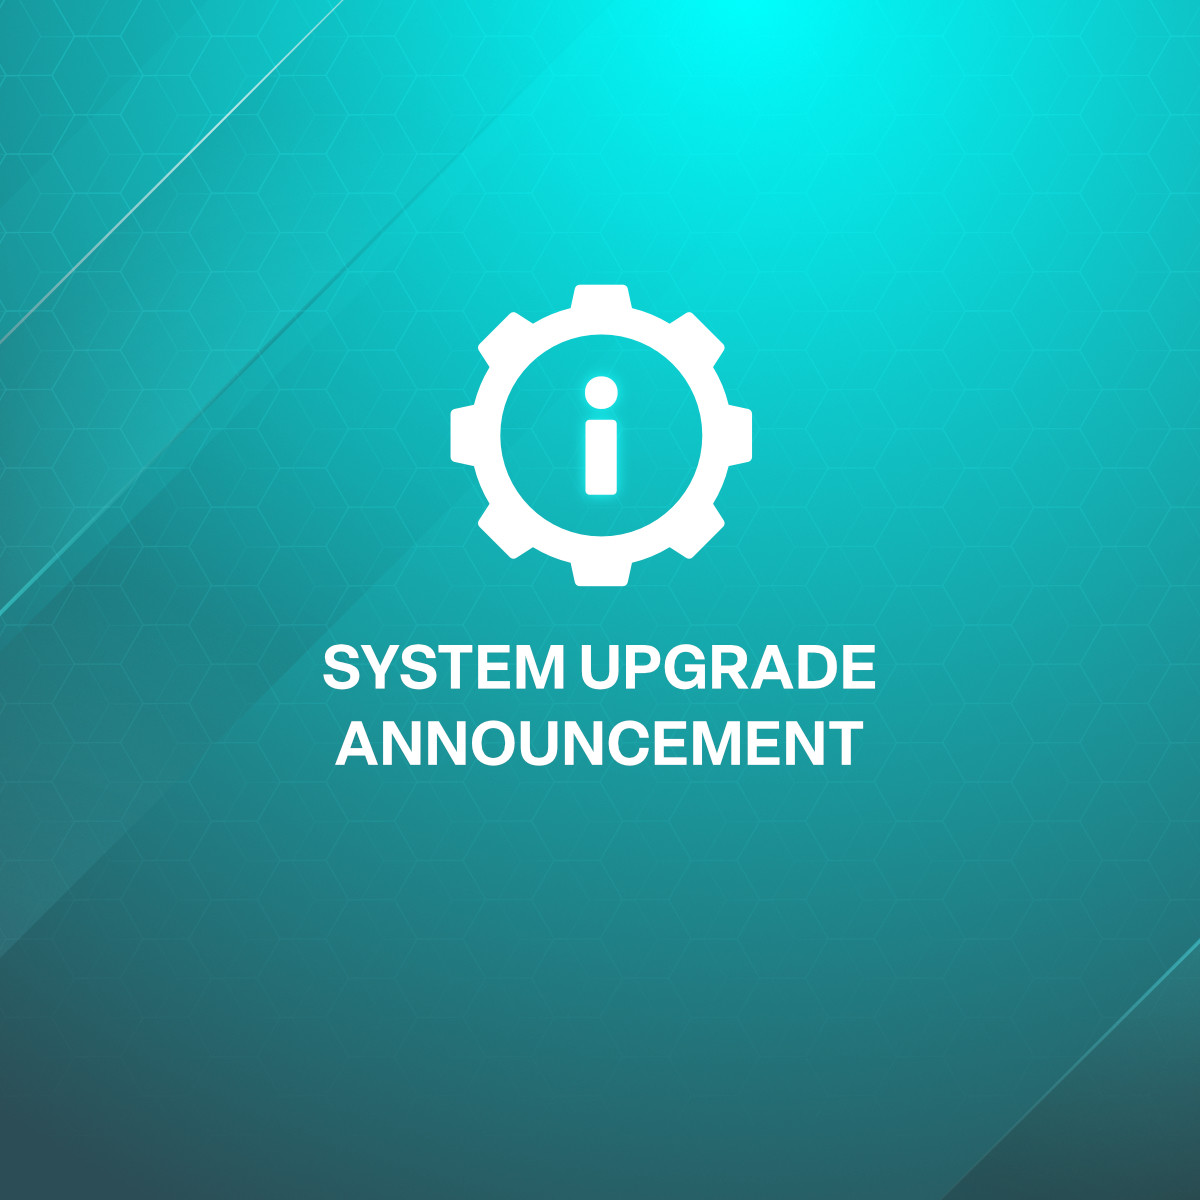 We upgrade our system to serve you better